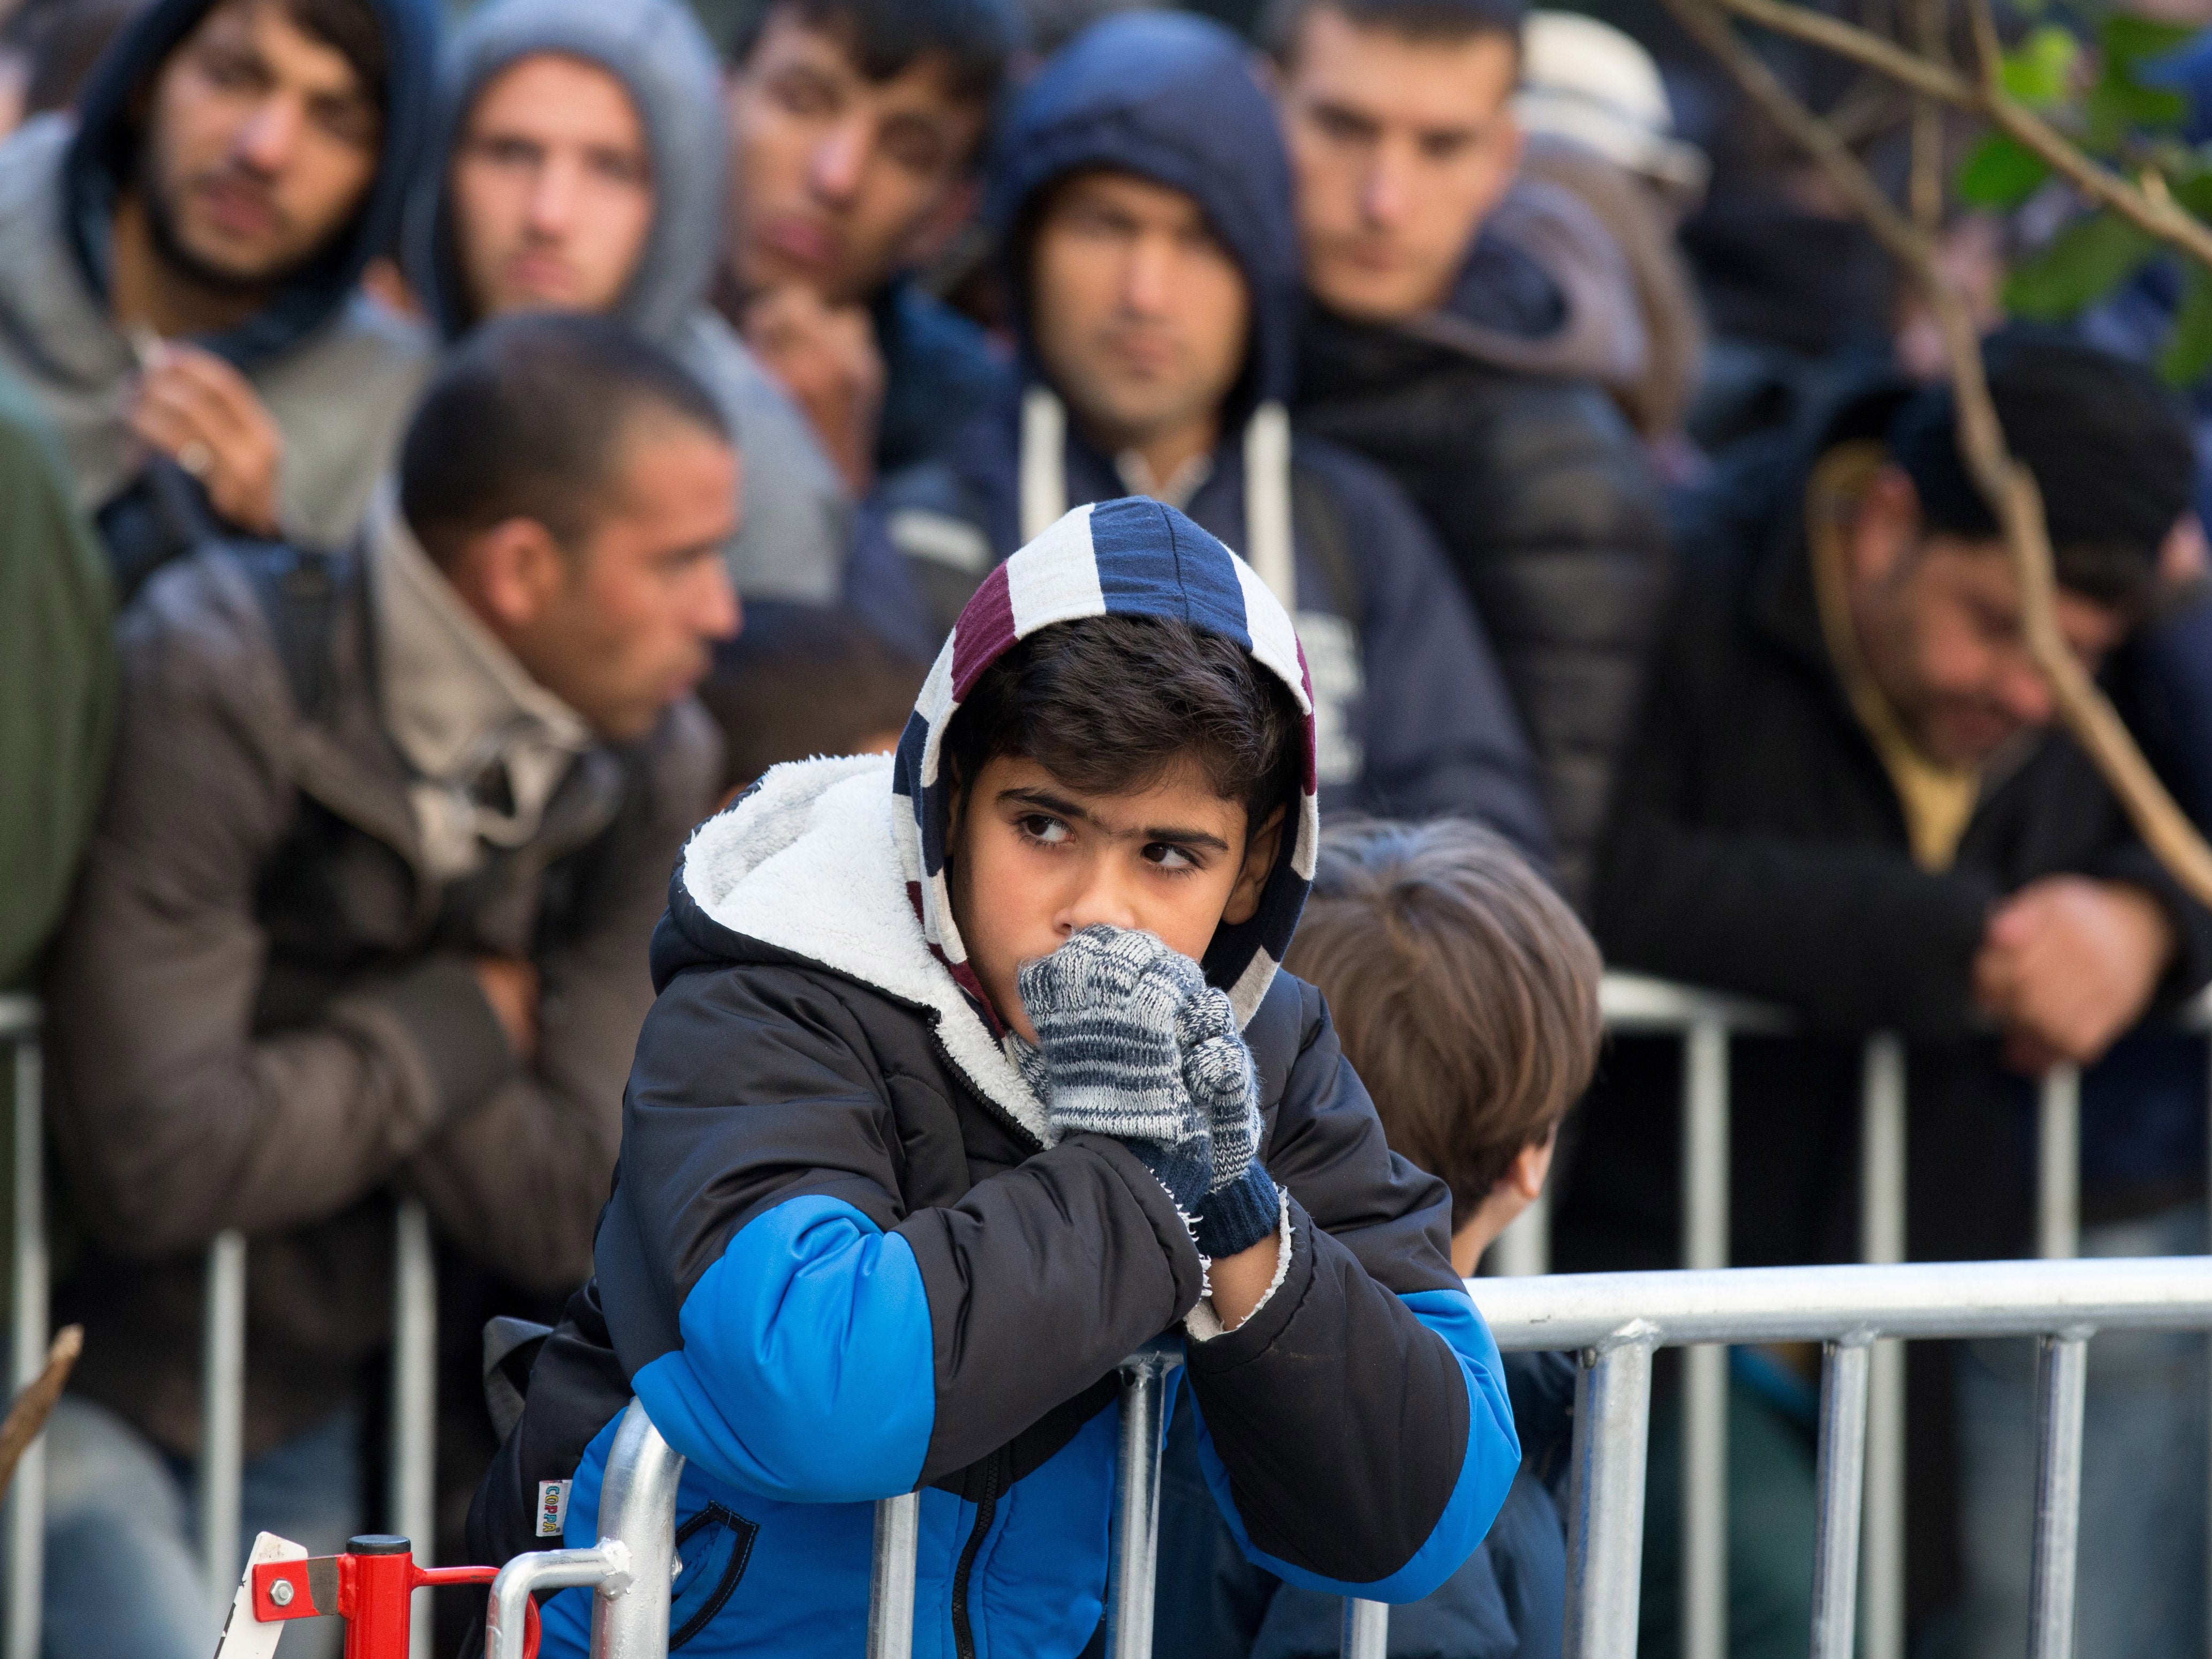 Berlin has nearly doubled its estimate for the number of refugees and migrants it expects this year